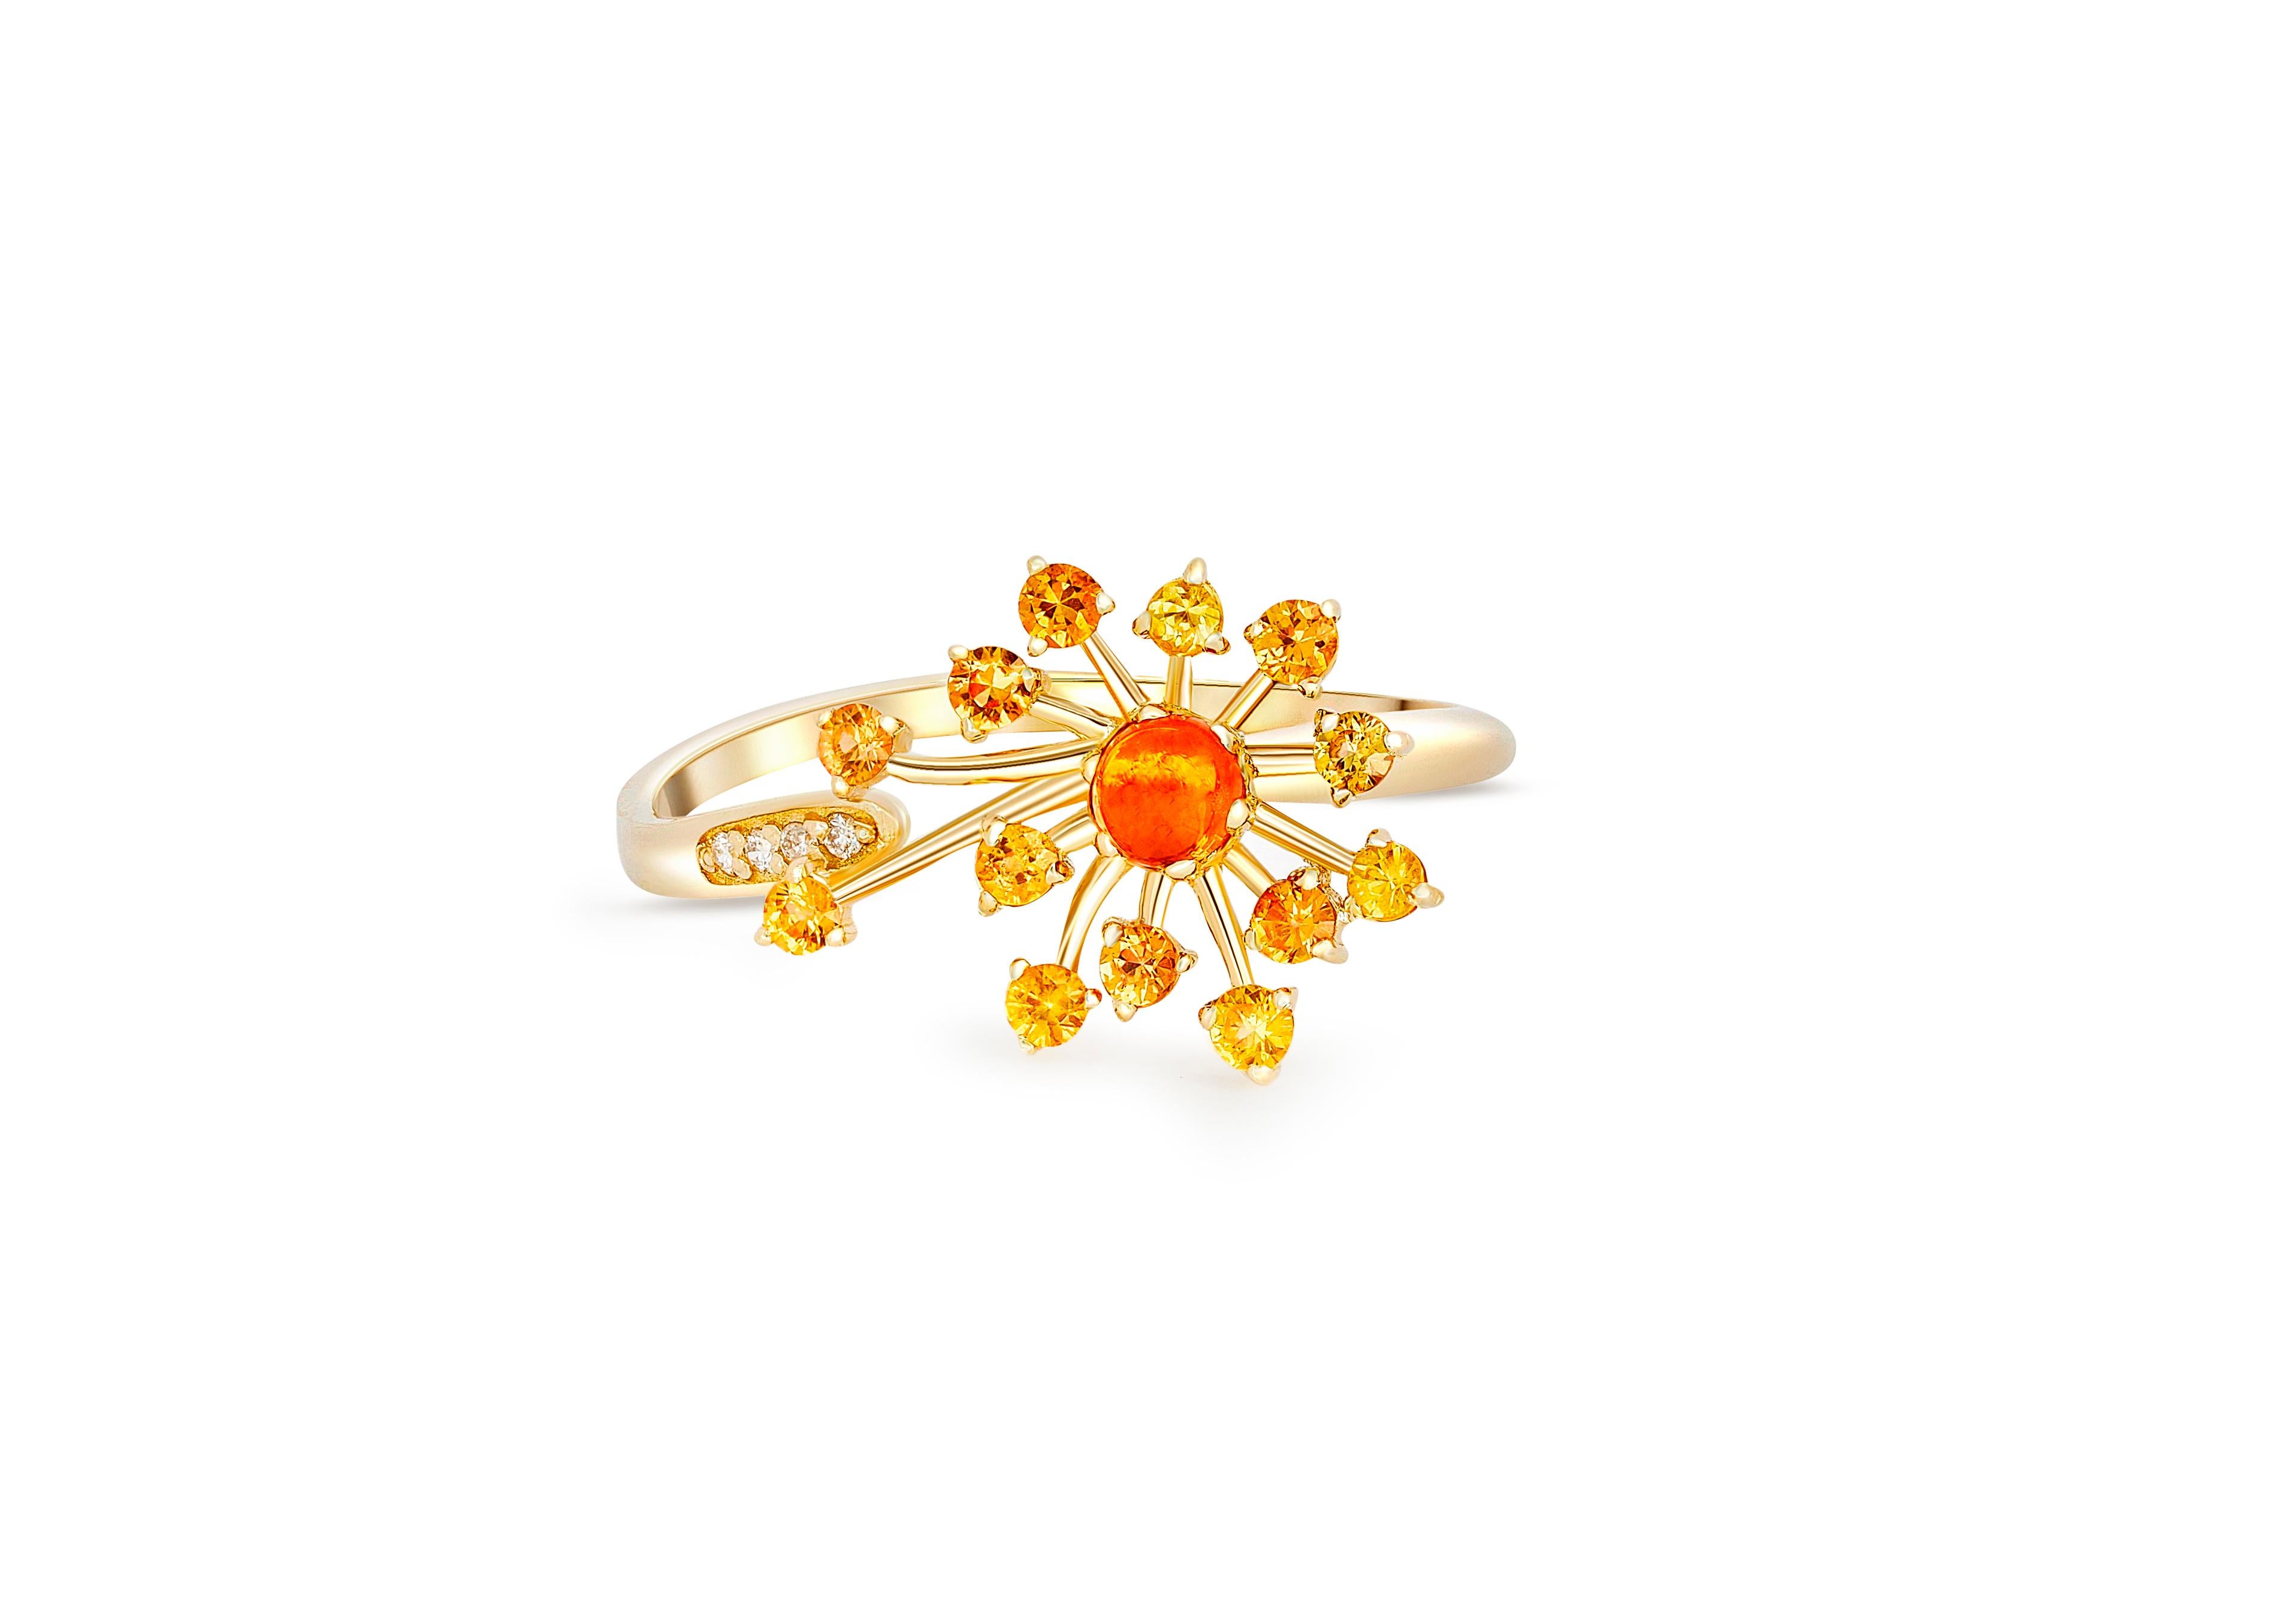 Dandelion flower ring with sapphires and diamonds. 
14 karat gold ring with yellow sapphire. Adjustable Sparkly Dandelion Ring. Sapphire ring.

Metal: 14k gold
Weight: 1.8 g. depends from size.

Central stone: sapphire
Cut: round cabochon
Weight: